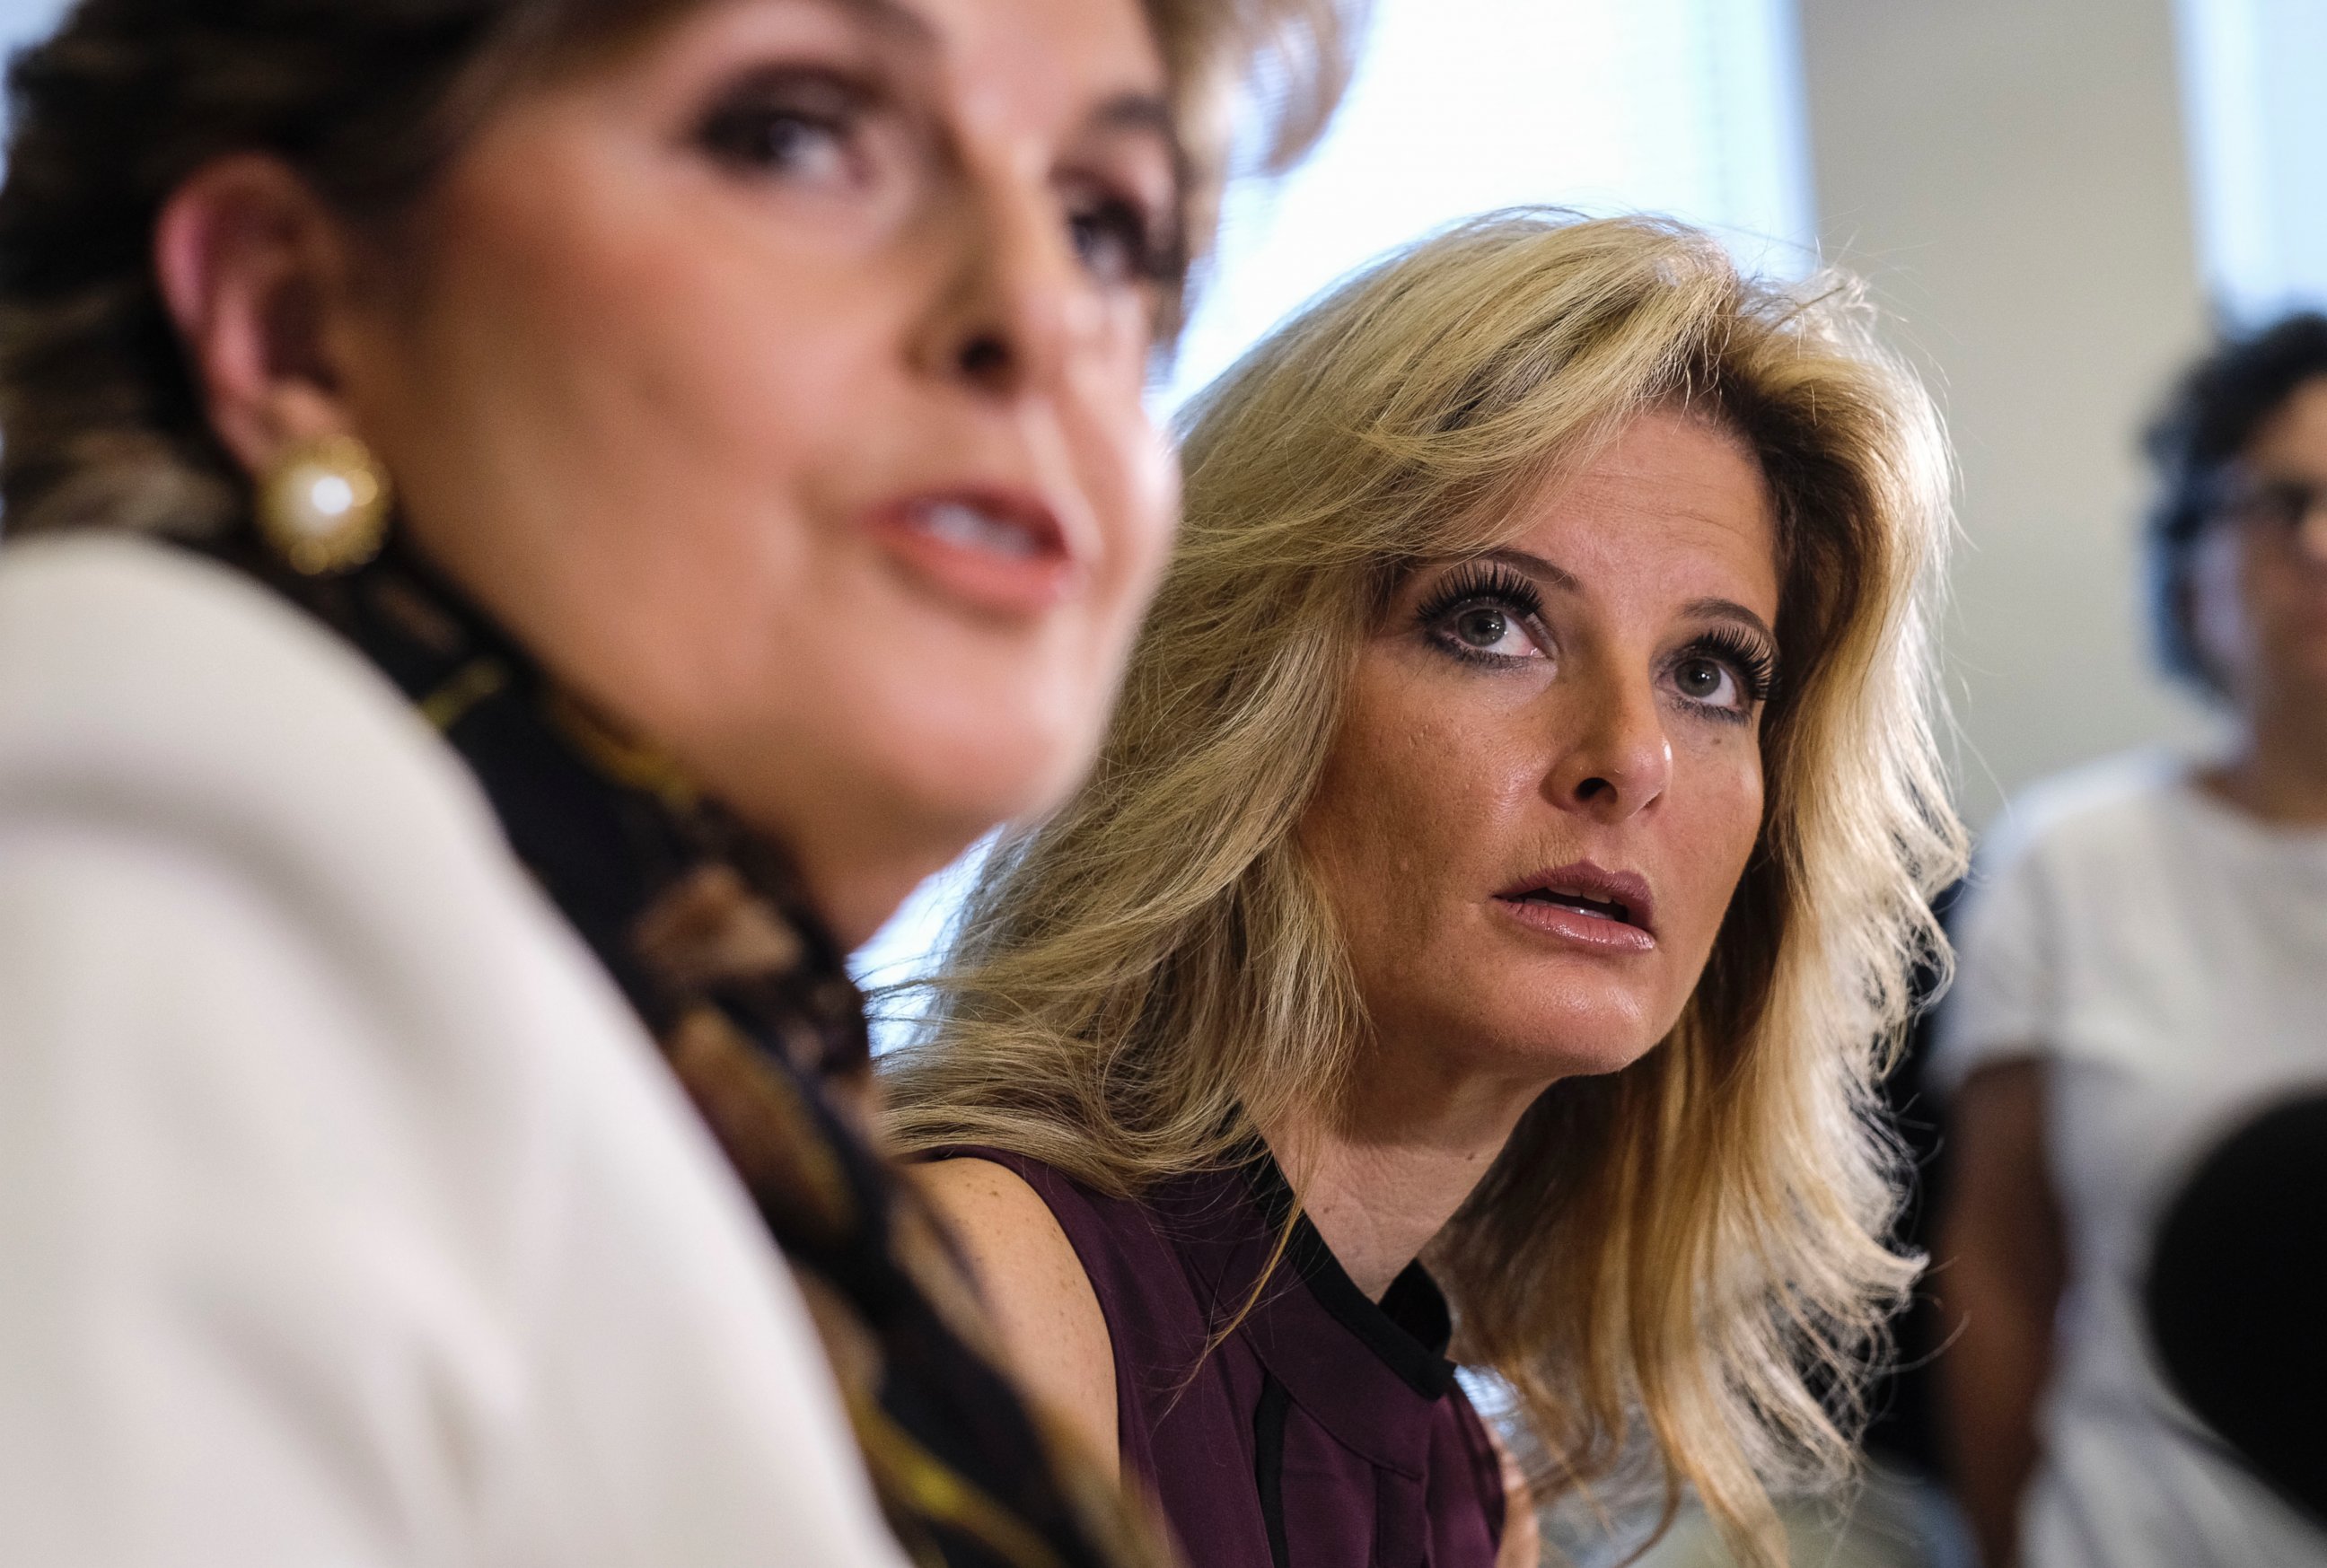 PHOTO: Summer Zervos, right, listens with her attorney Gloria Allred during a news conference in Los Angeles, Oct. 14, 2016. Zervos, a former contestant on "The Apprentice" says Trump made unwanted sexual contact with her at a Beverly Hills hotel in 2007.